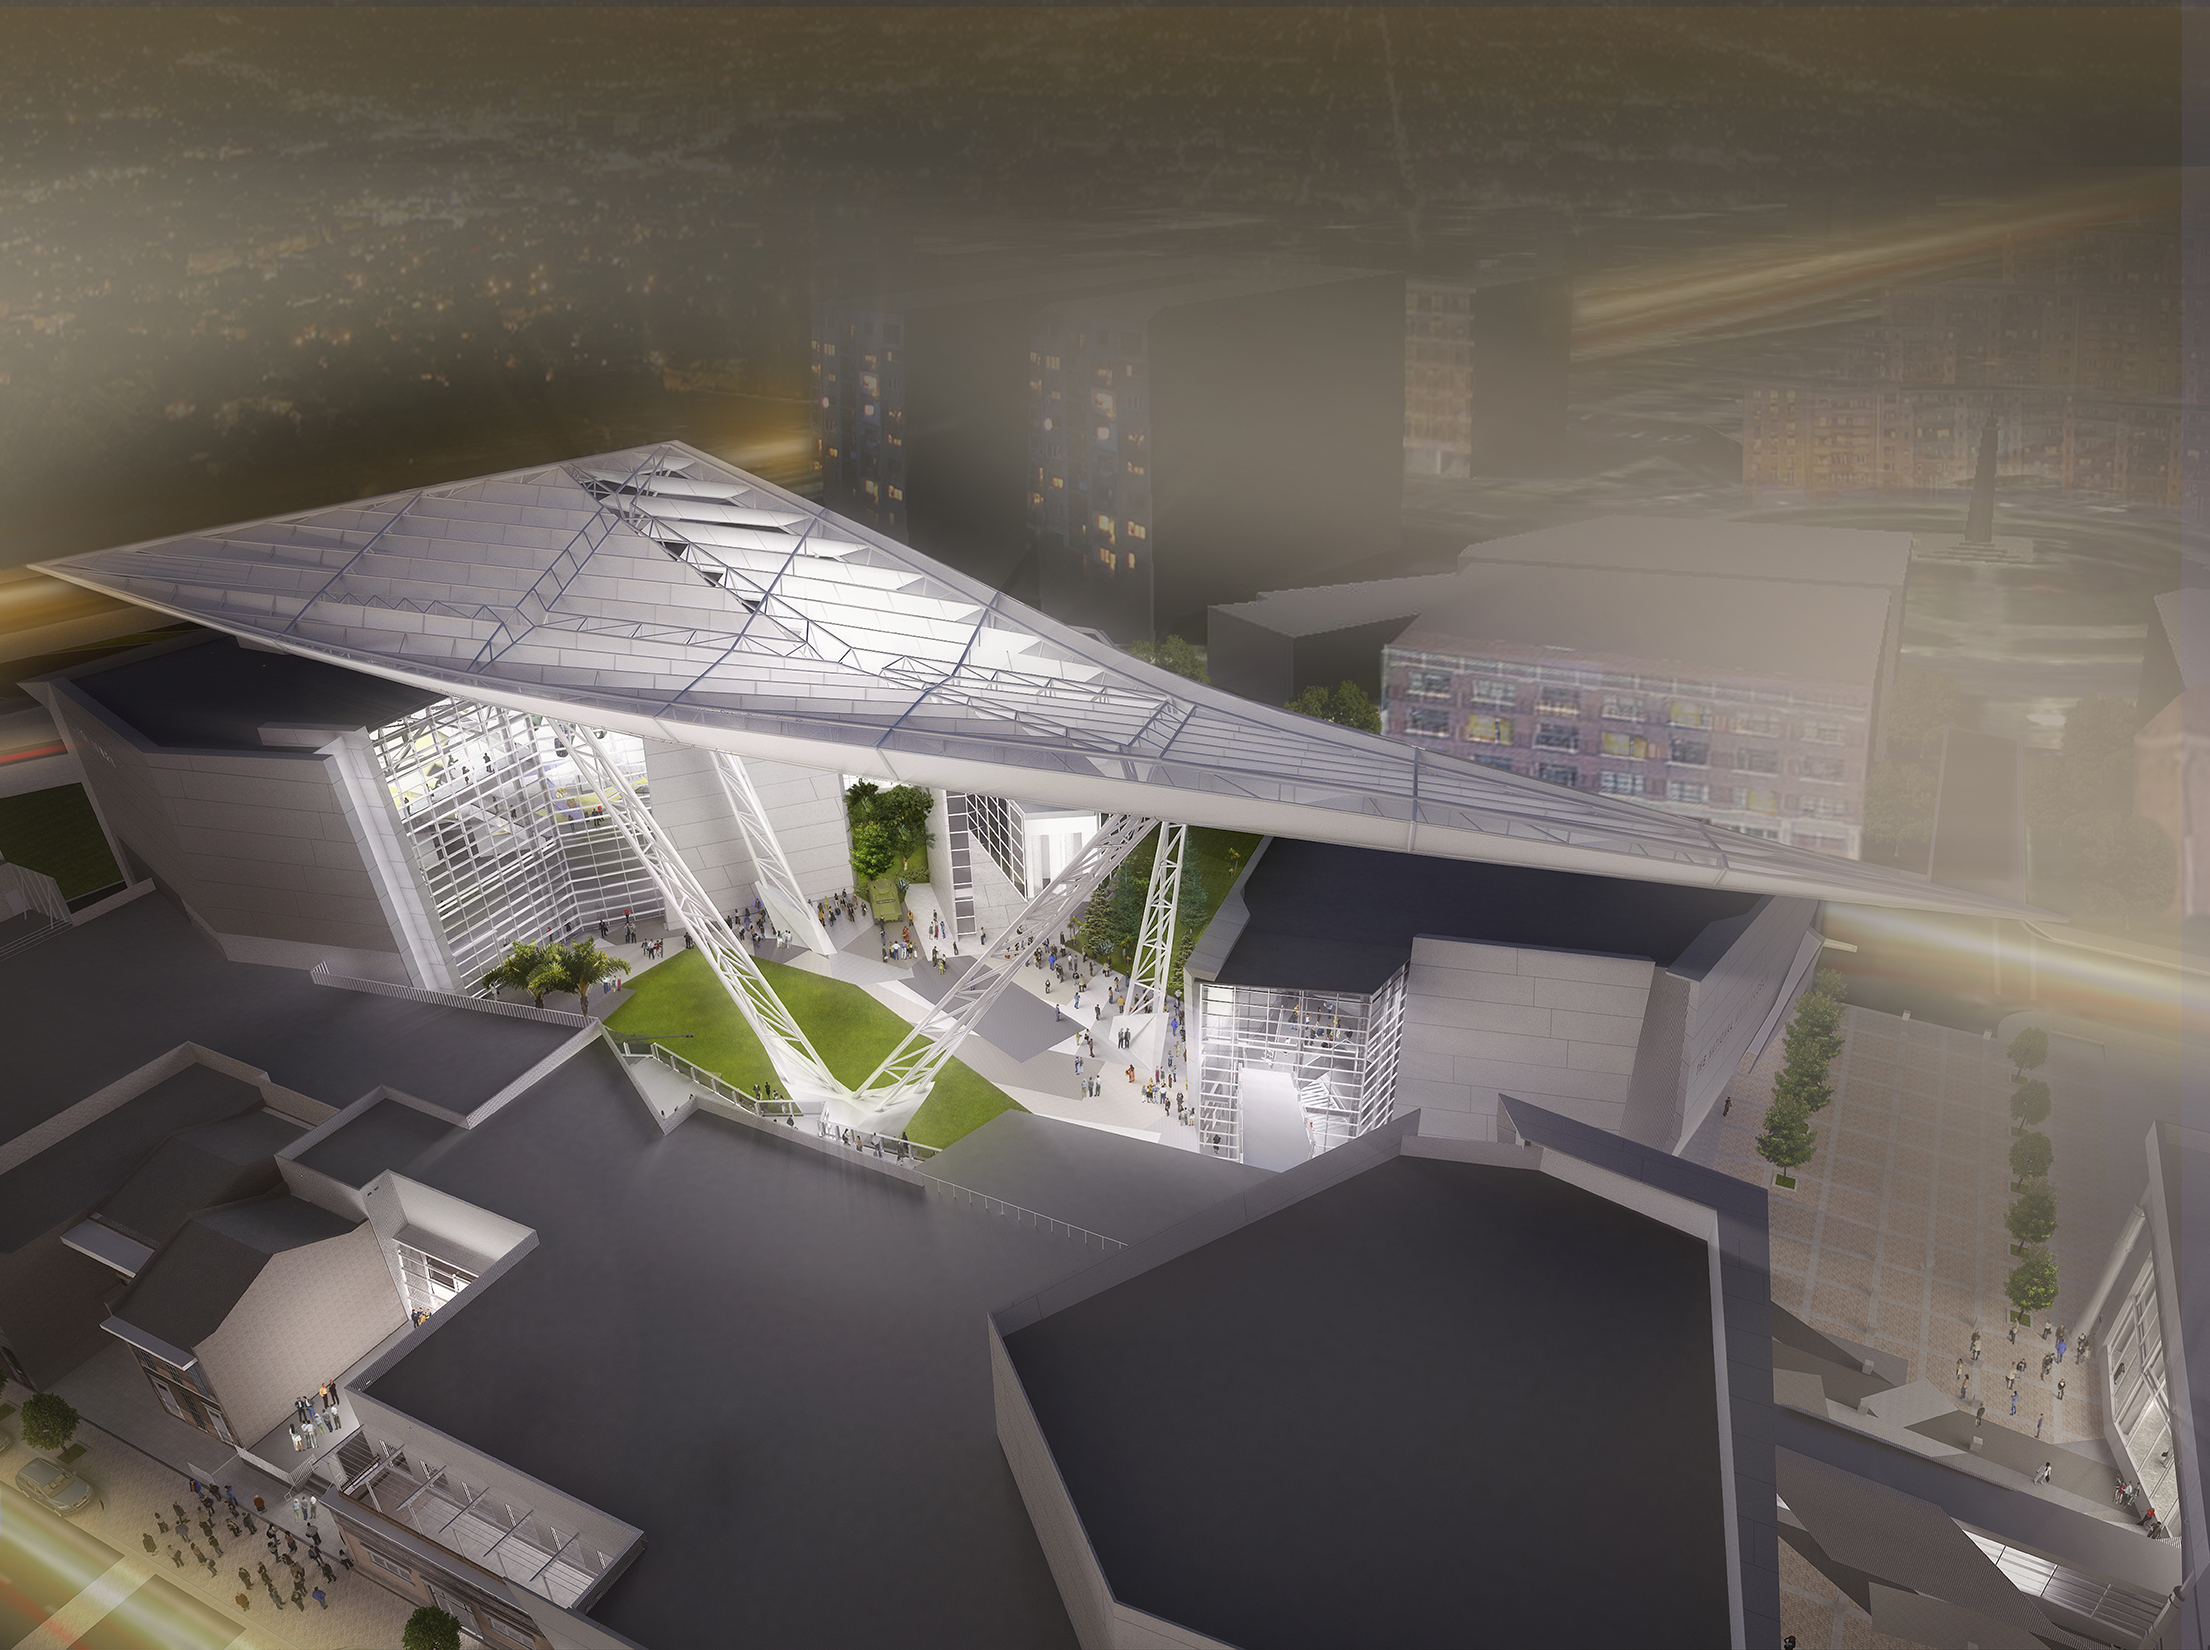 Rendering of the canopy above the National WWII Museum in New Orleans